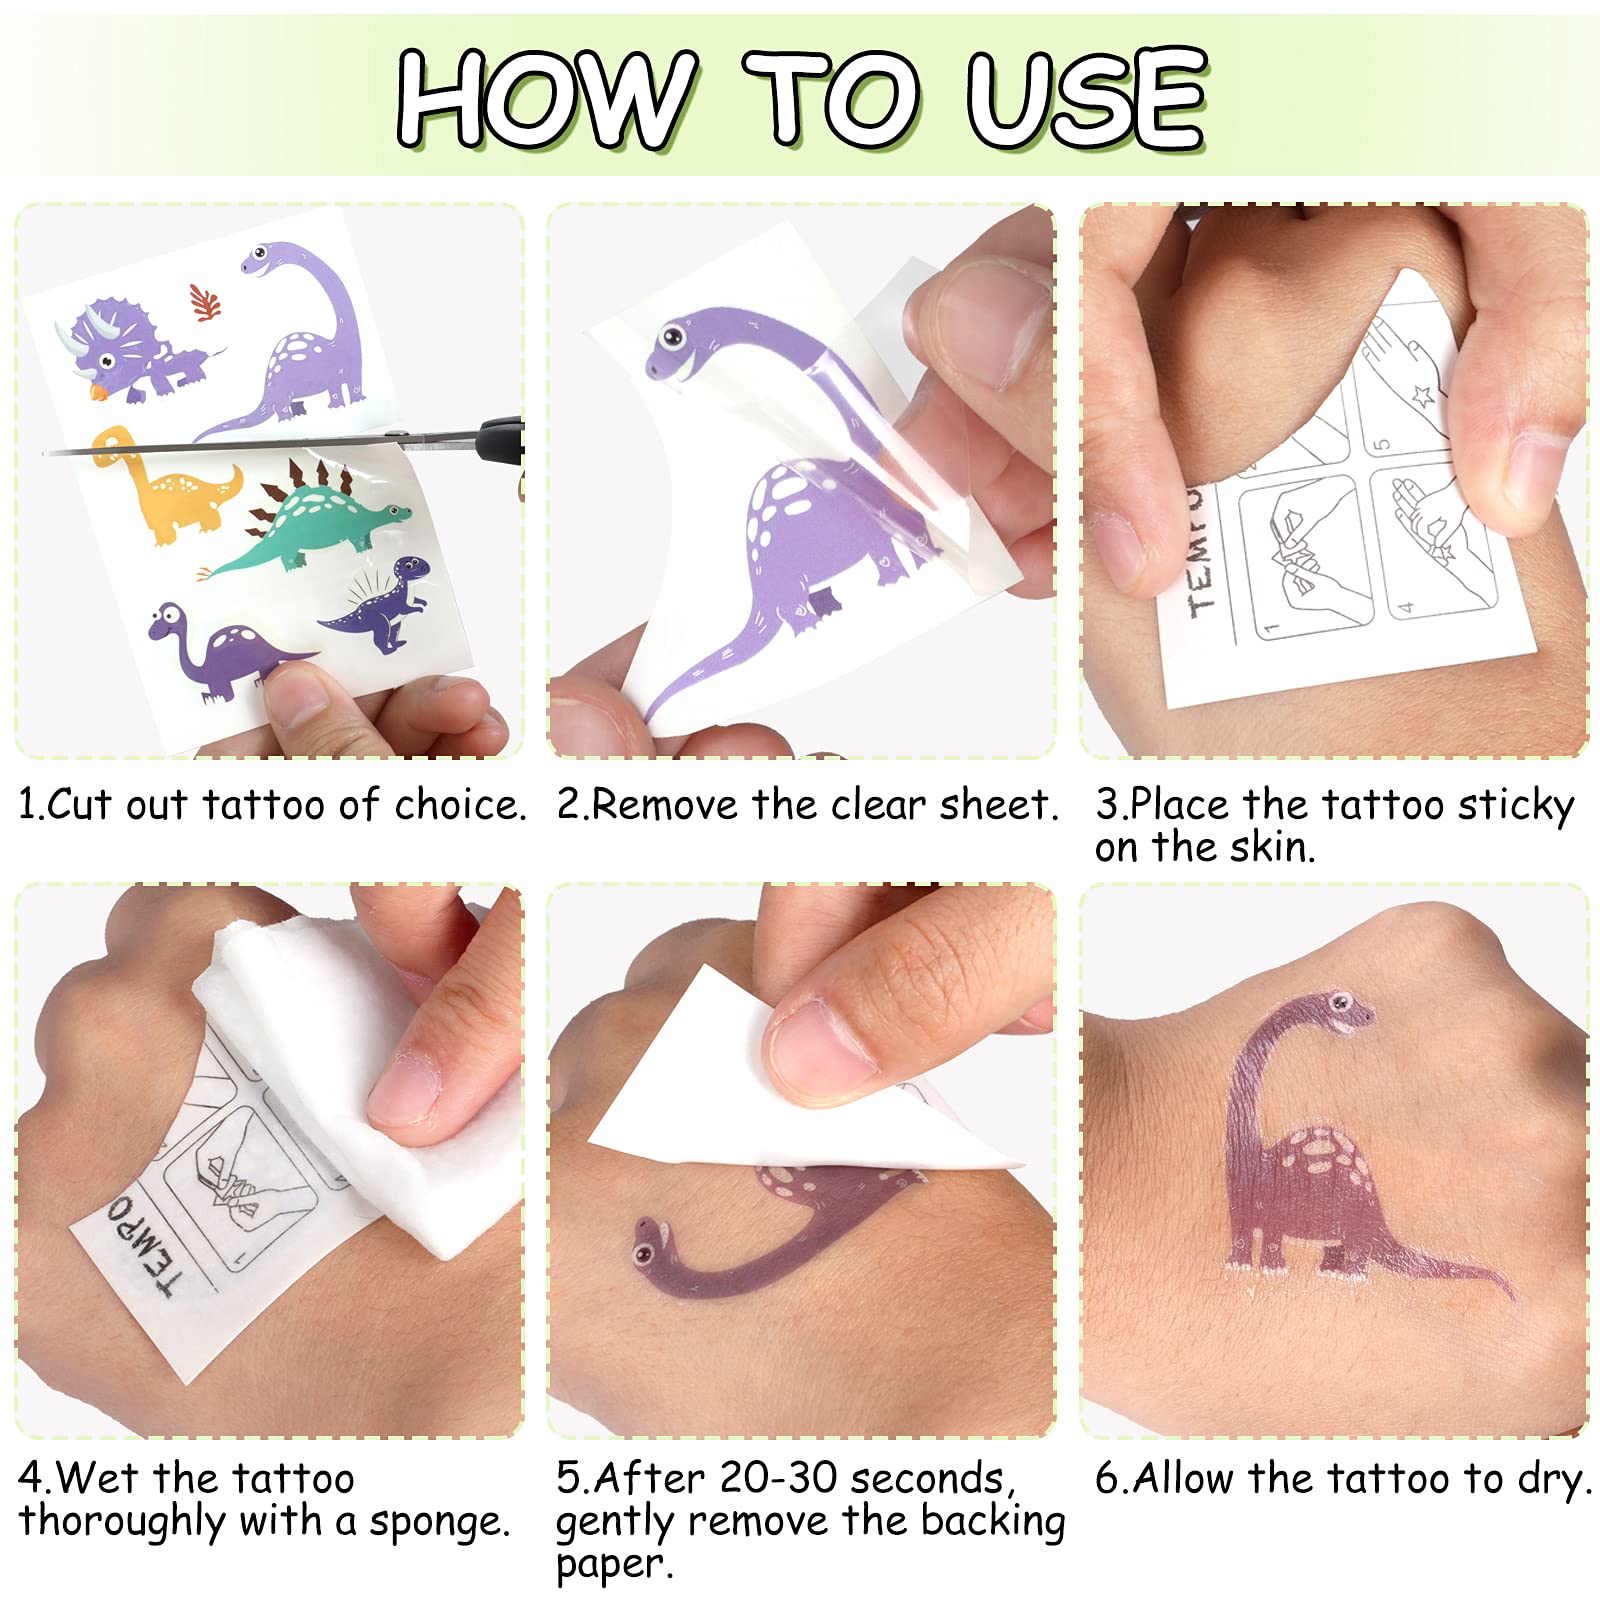 GLOW IN THE DARK: Easy to use: Choose your favorite dinosaur, tear it off, wet the fake tattoo with water, wait 20-30 seconds, and finally gently tear off the white surface. You will get a glowing